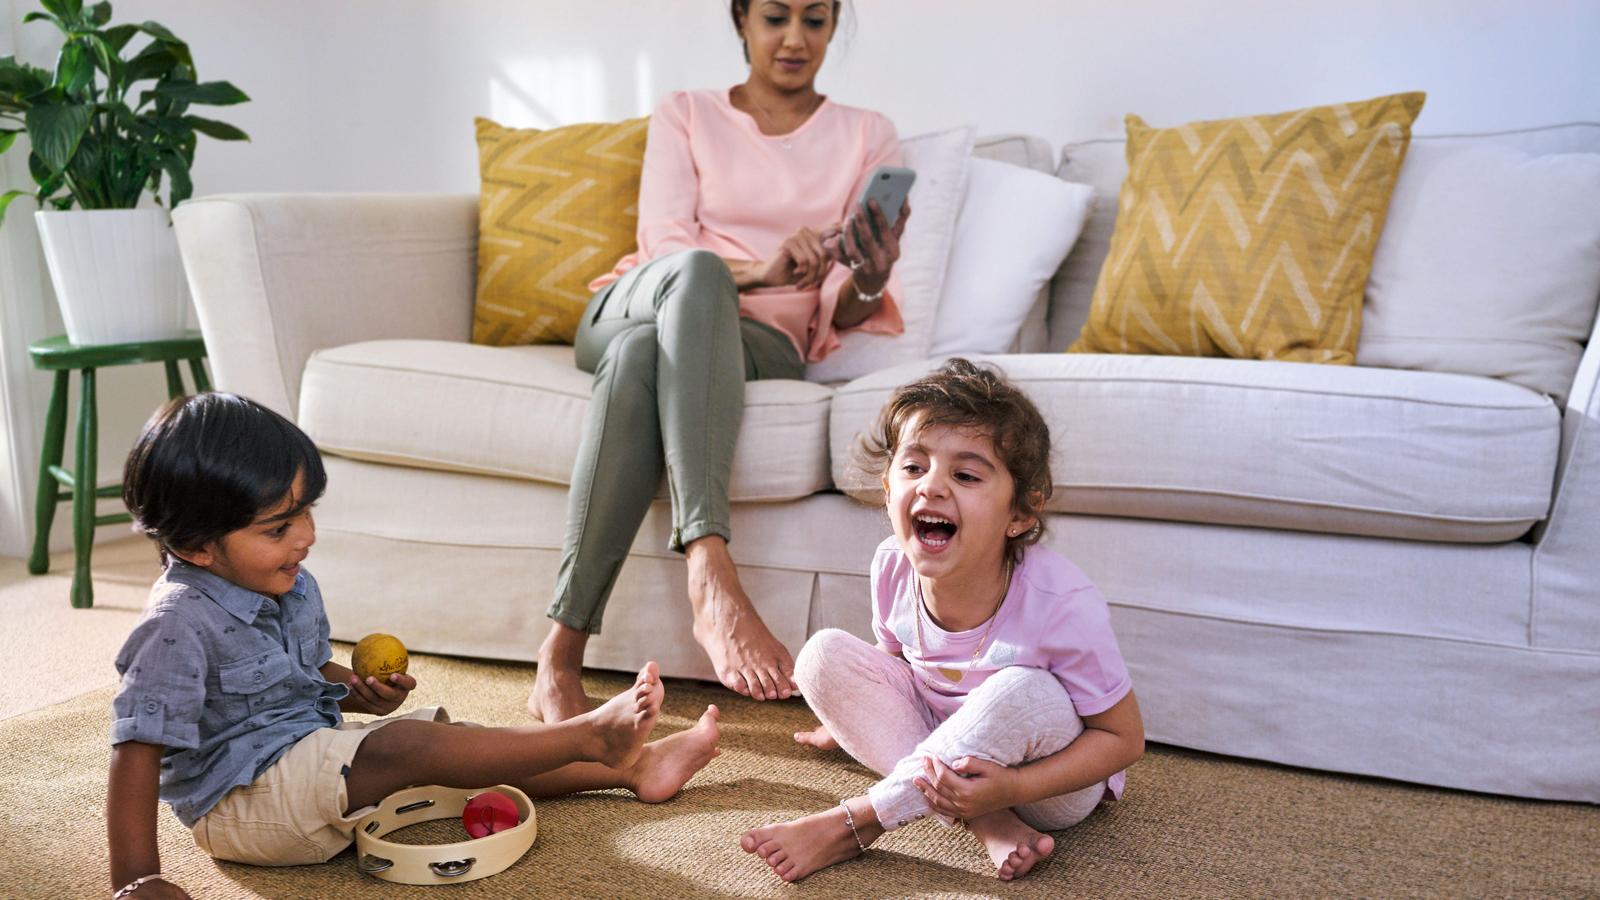 Two children playing in lounge room as their mother watches them